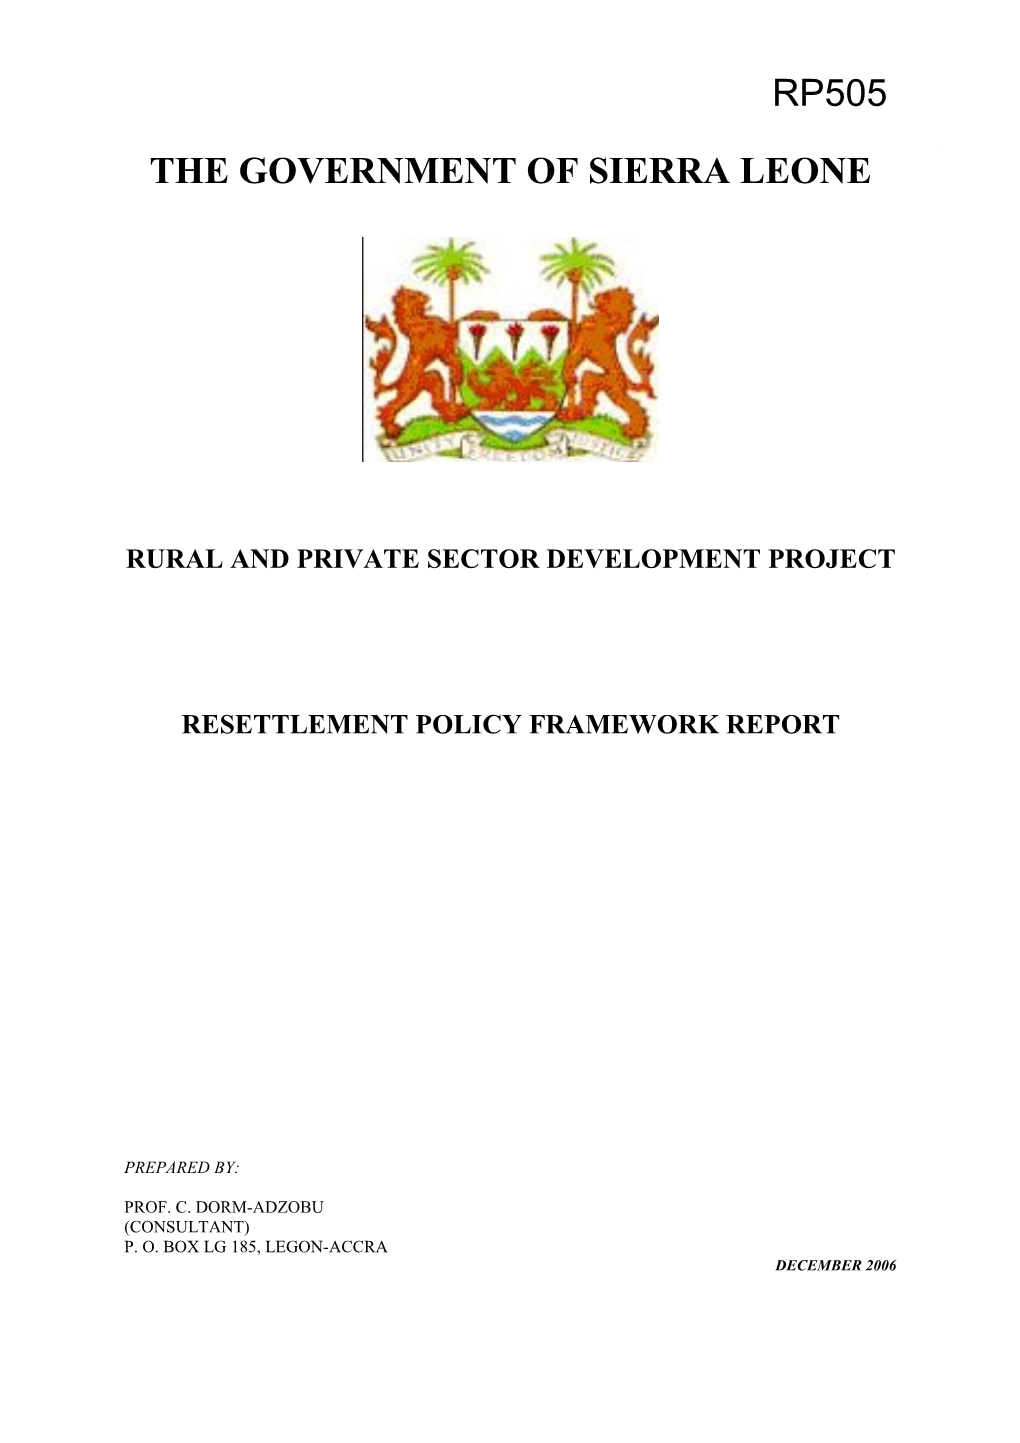 Sierra Leone Rural and Private Sector Development Project